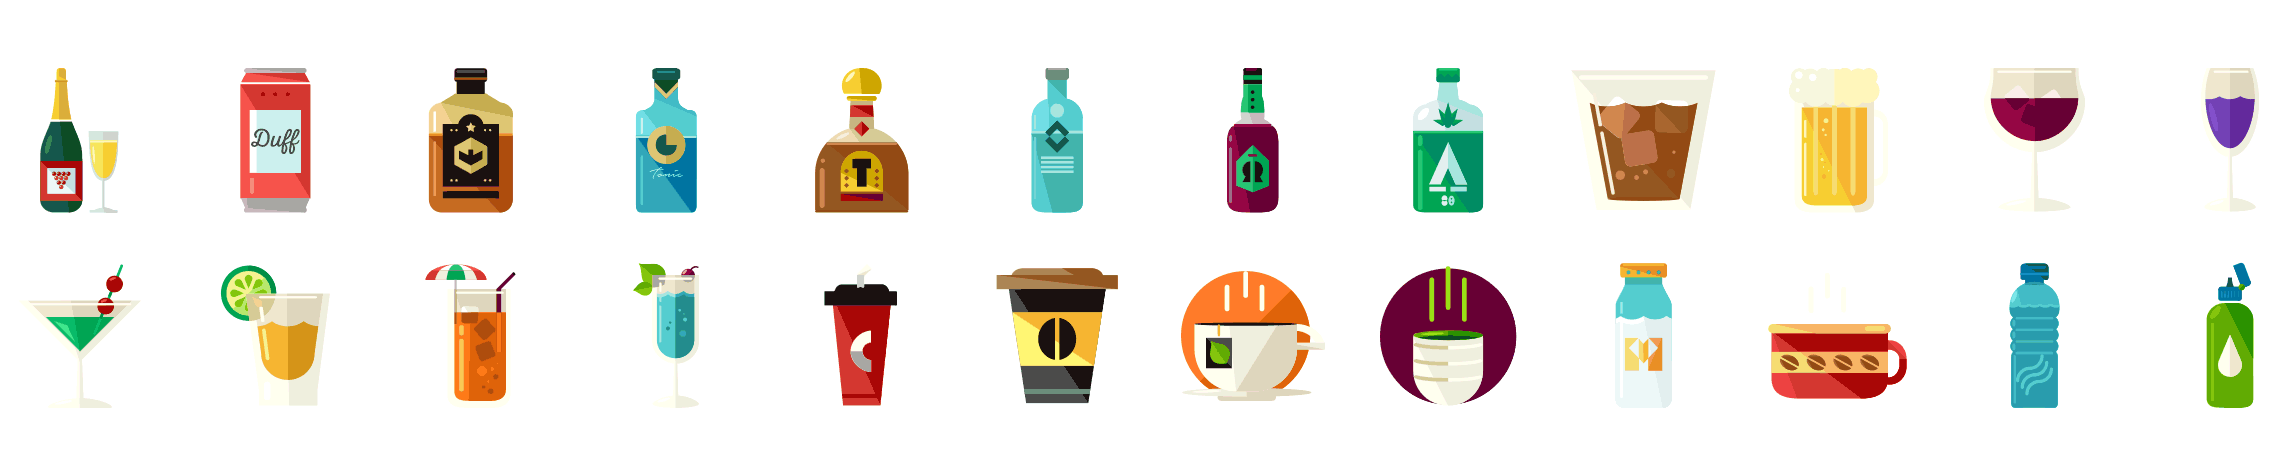 Drinks-flat-icons